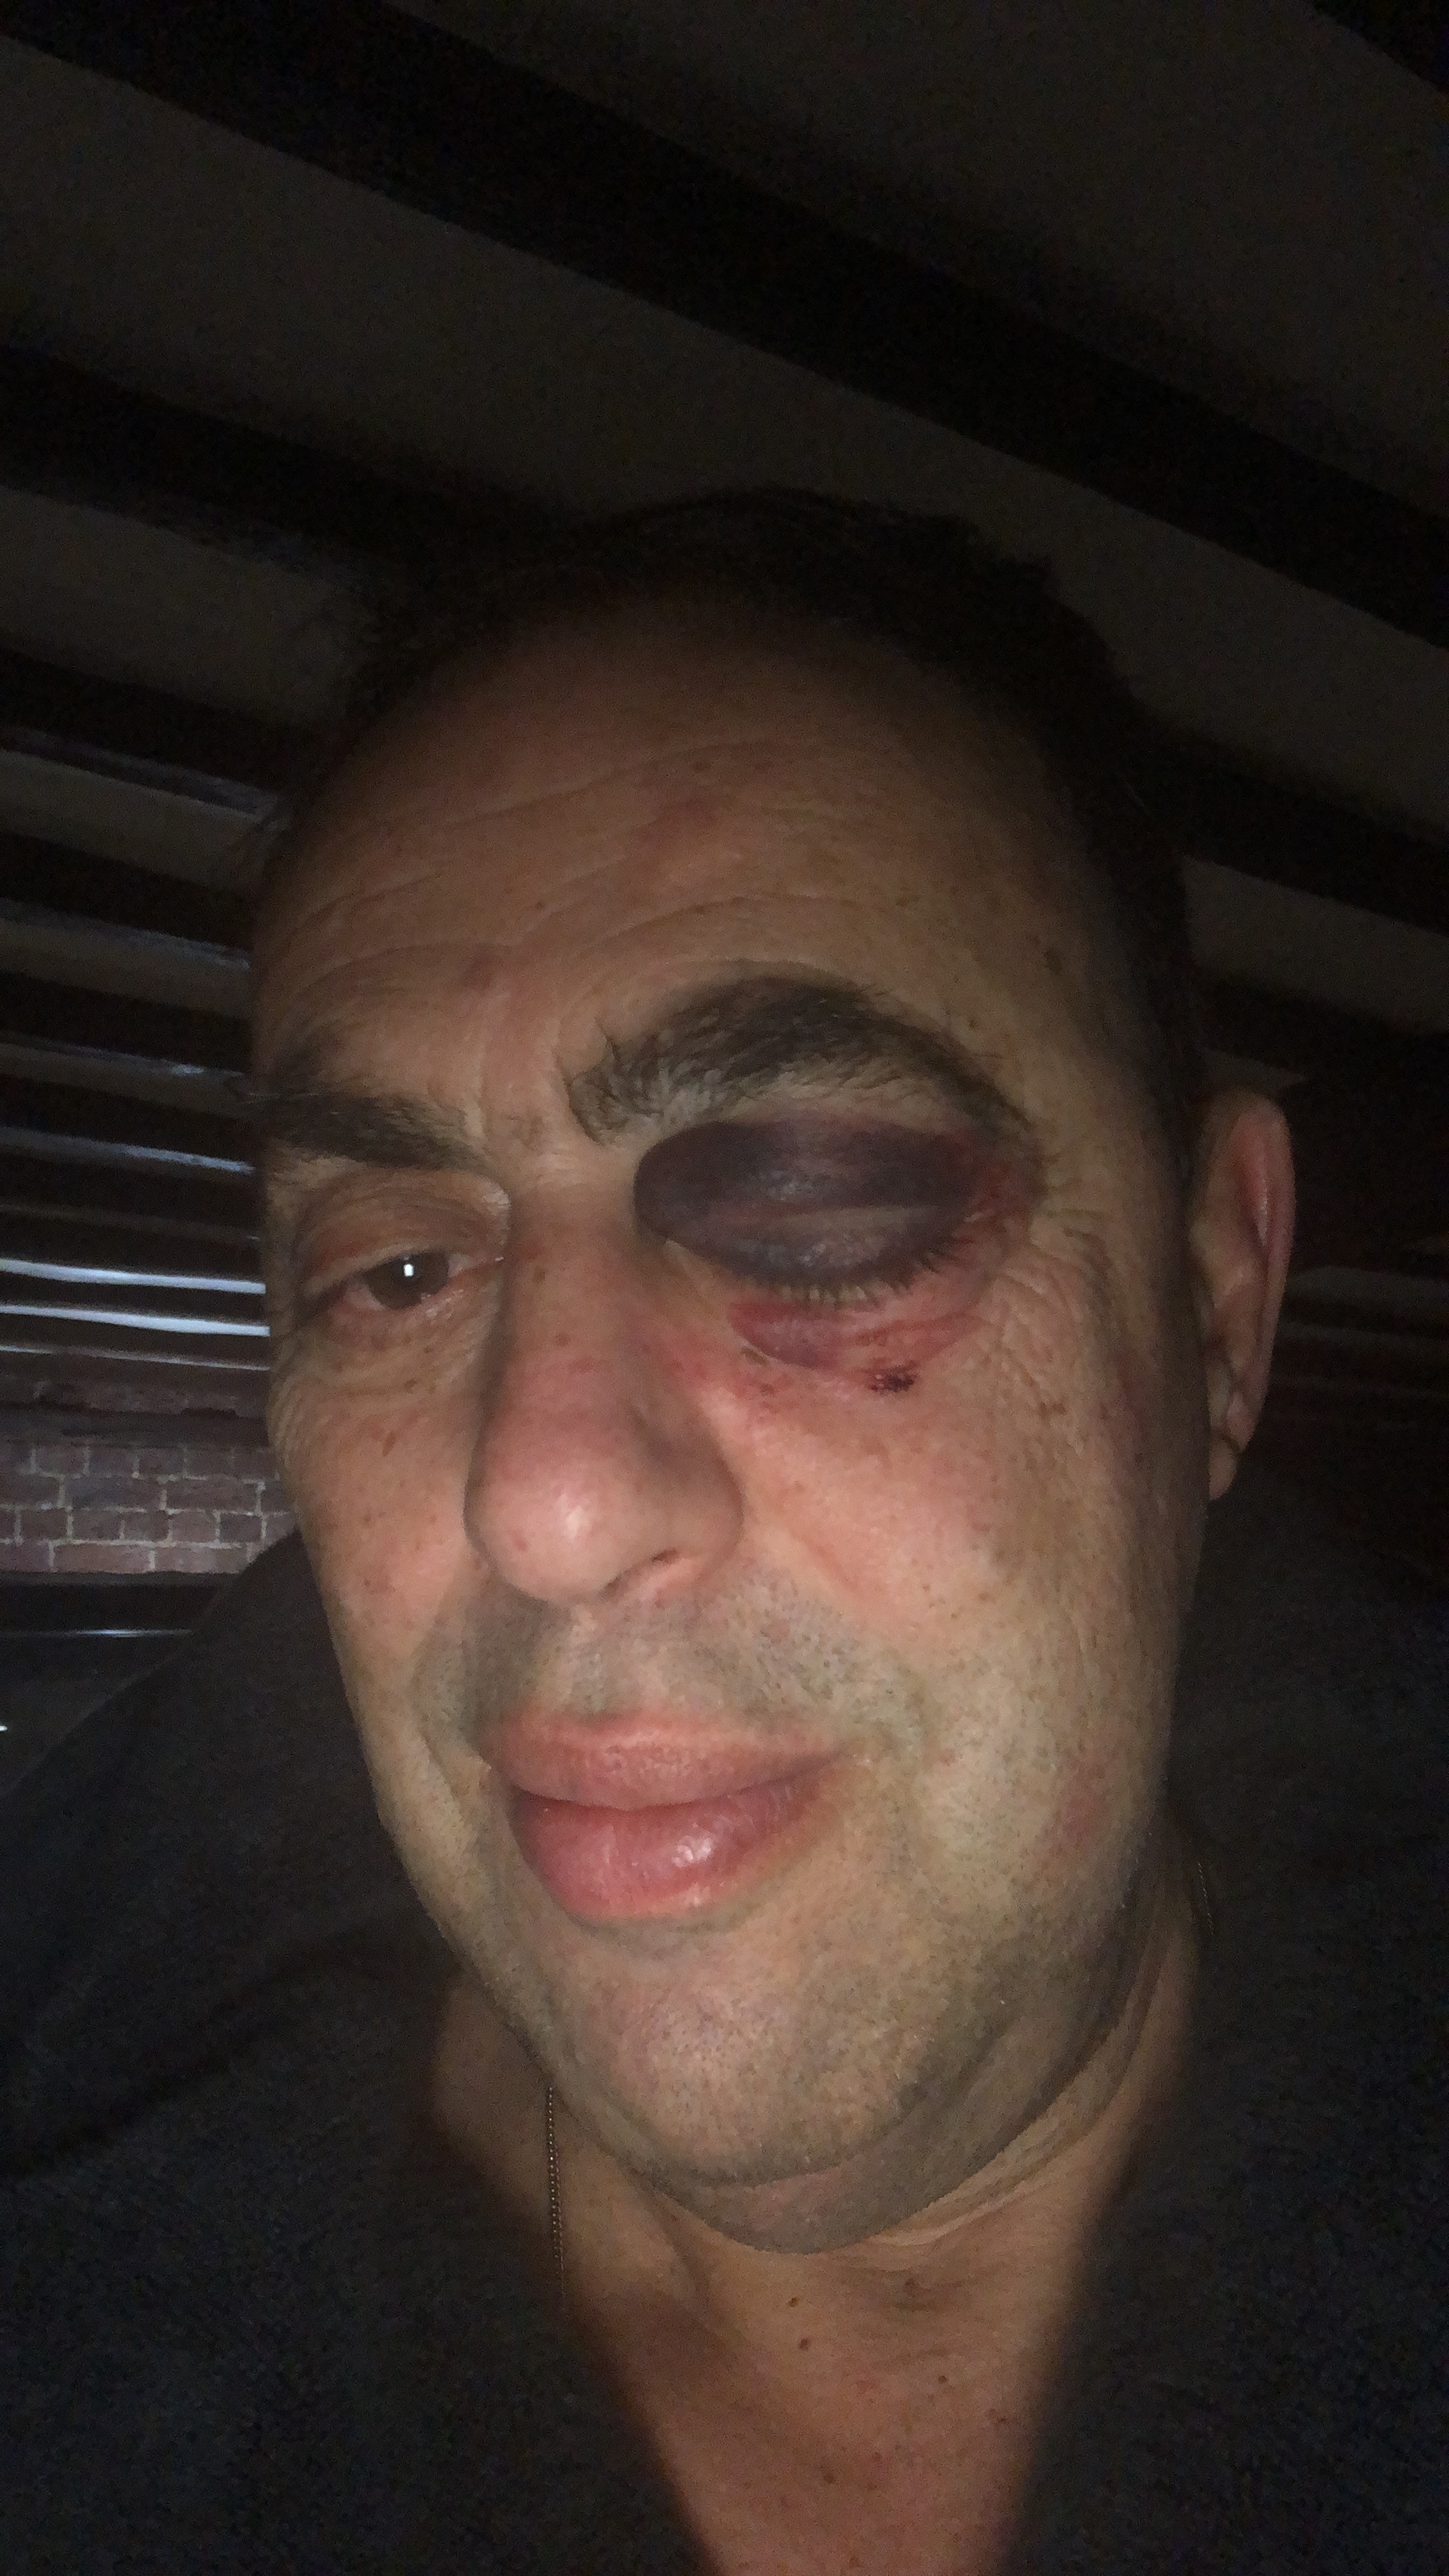 Colin was left with a fracture by the cheekbone and a severely bruised eye